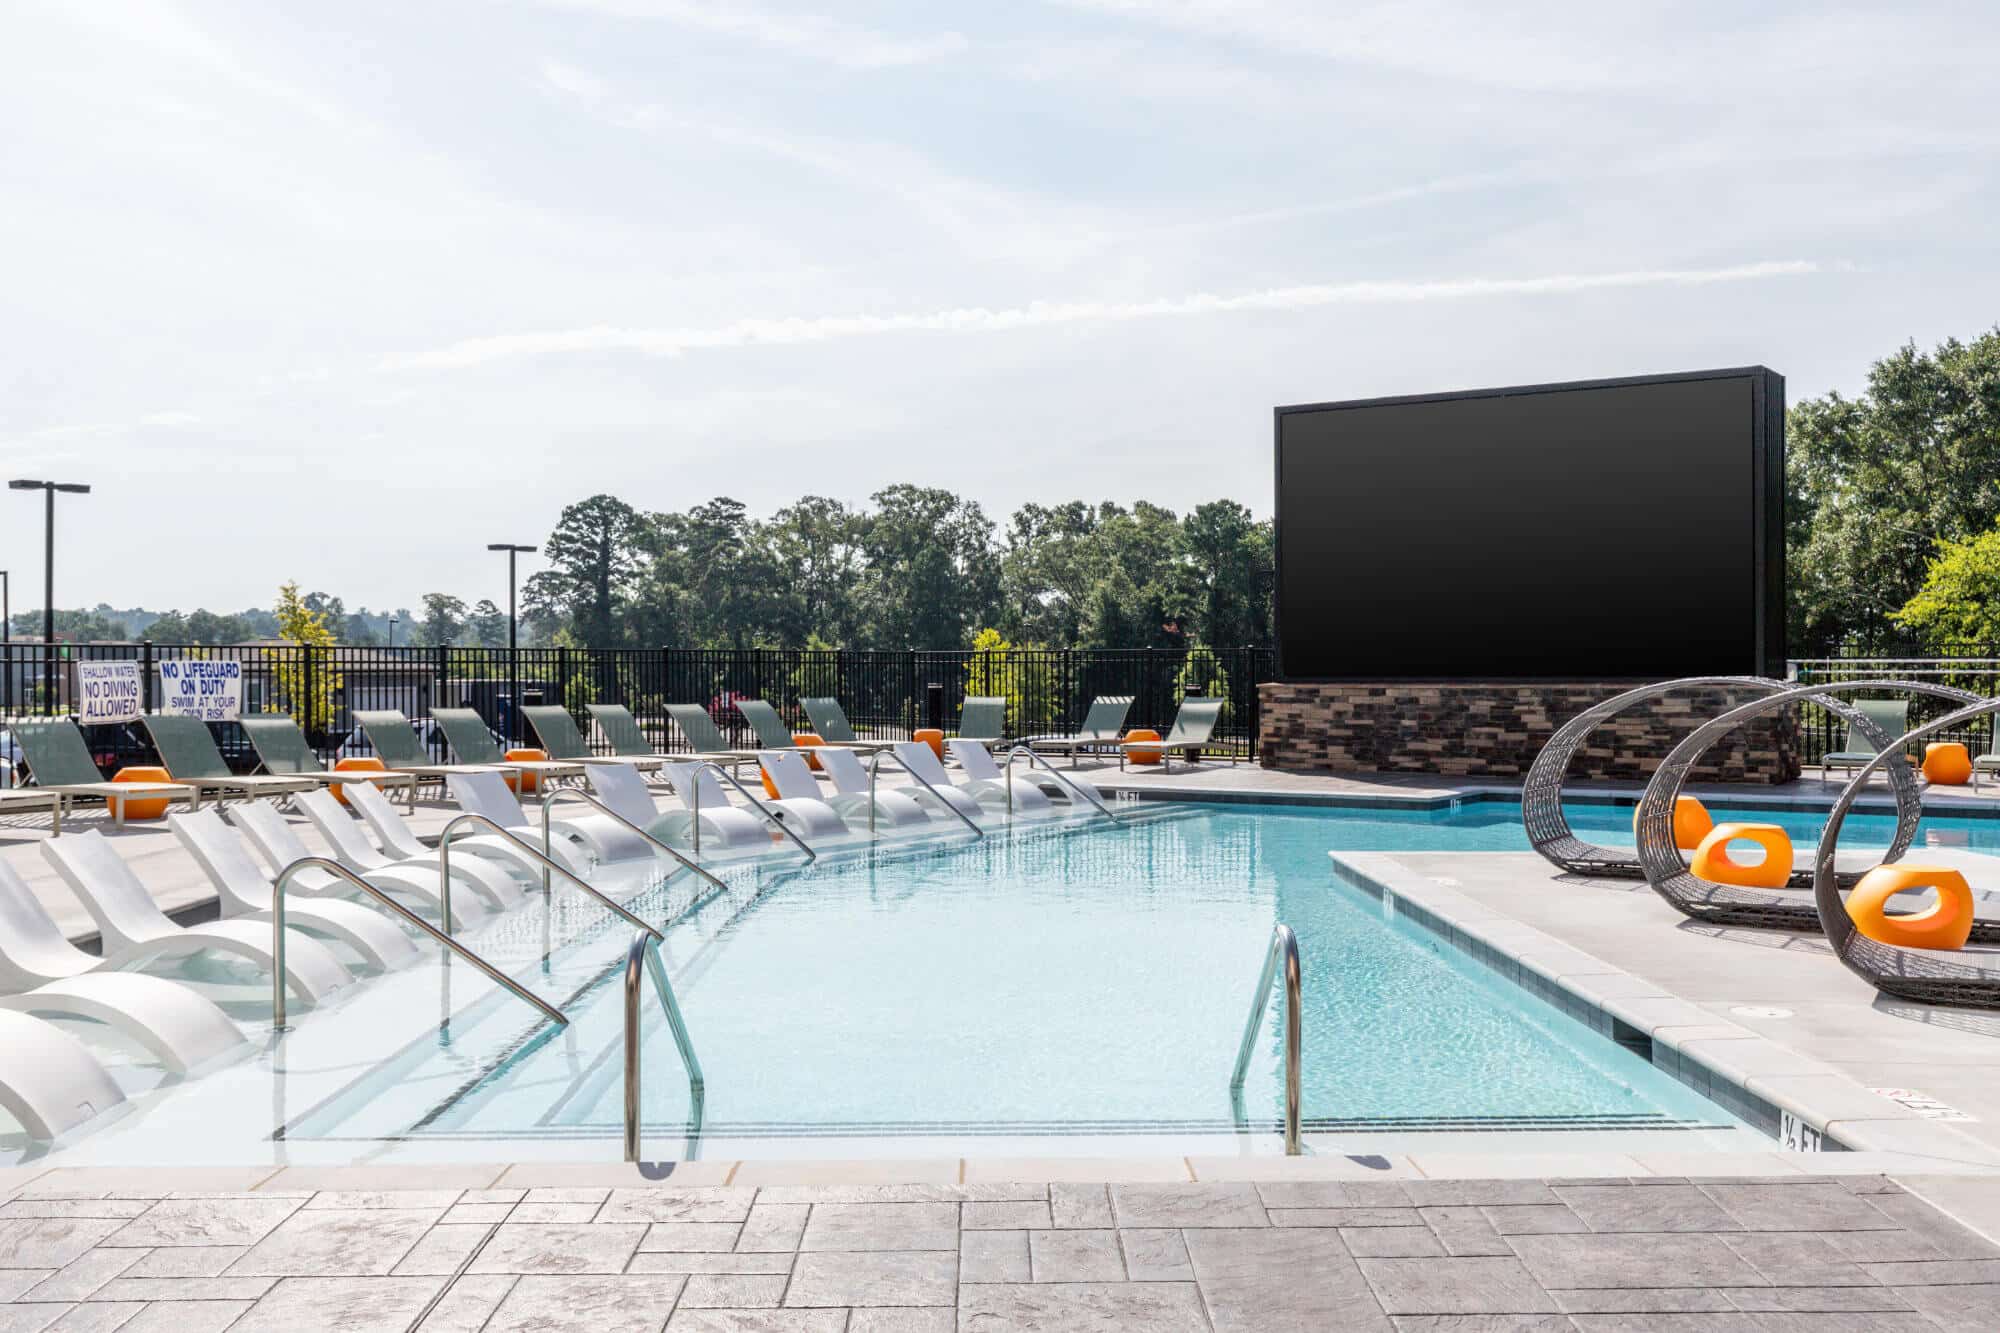 signature hartwell village off campus apartments near clemson university resort style pool with 24 foot outdoor jumbotron screen